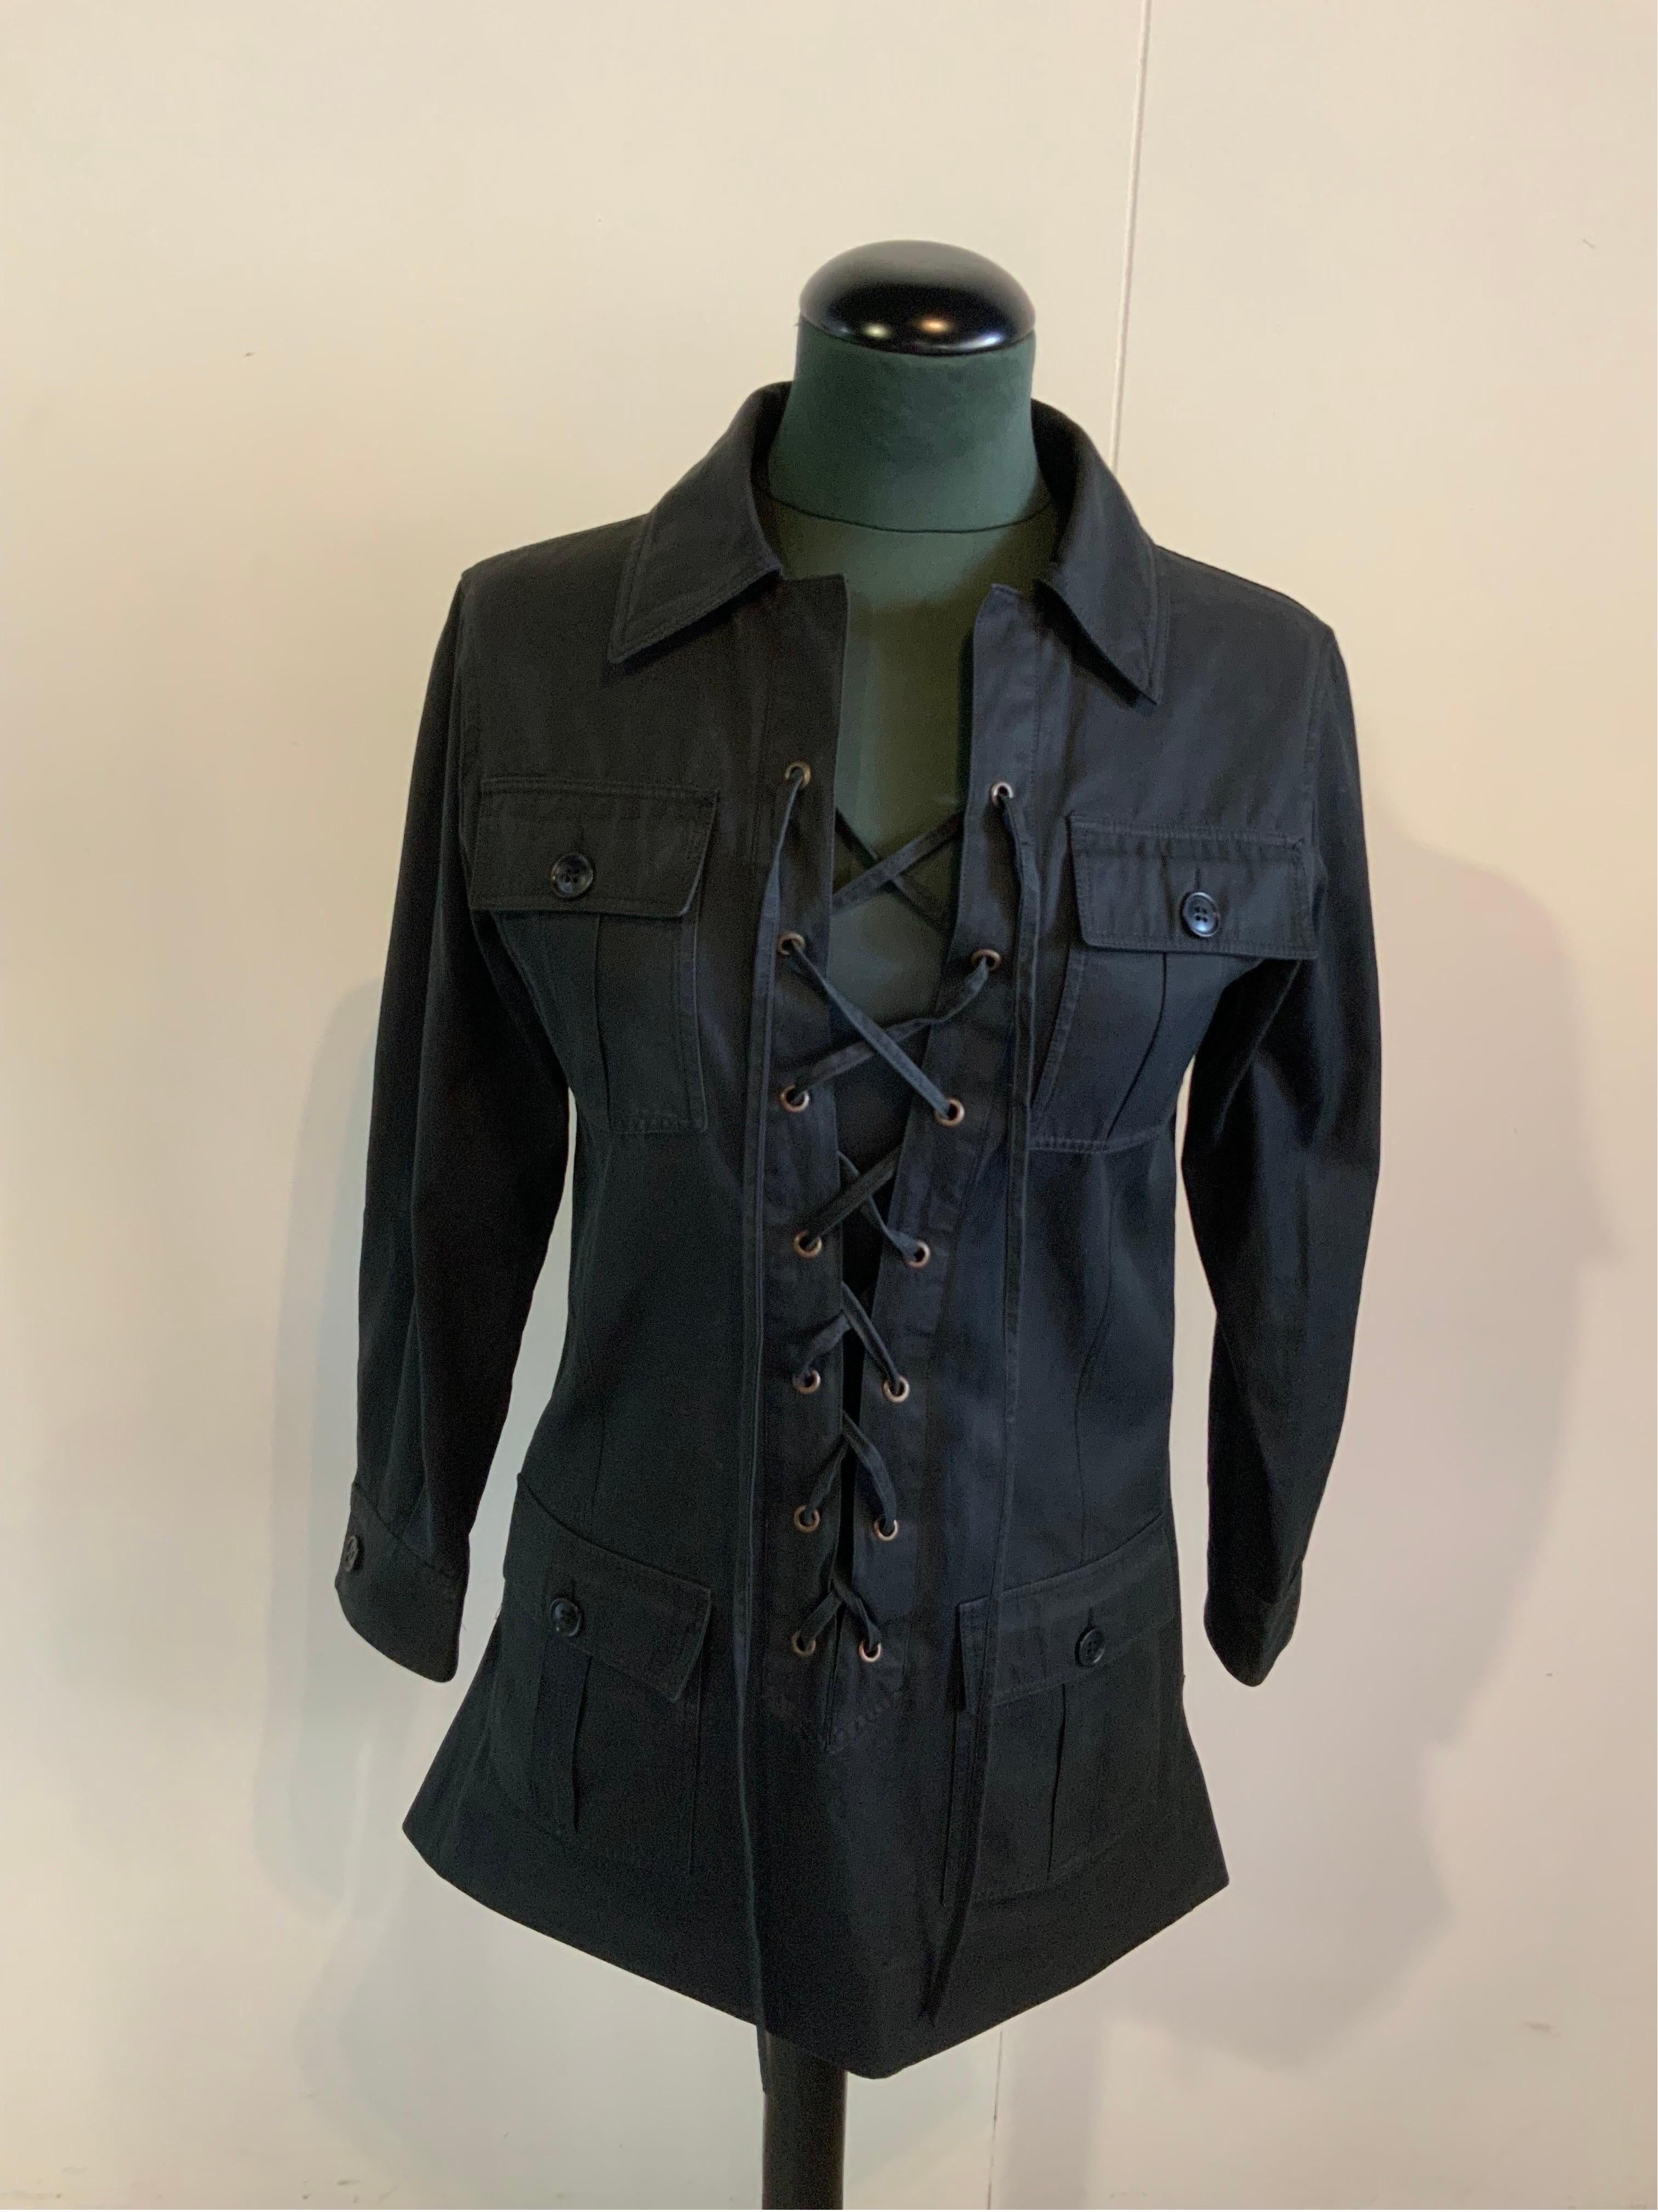 Yves Saint Laurent Saharan Safari Jacket.
Iconic 70s vintage piece.
Composition and size label are missing.
We think it's cotton. Dark anthracite colour.
It fits an S.
Shoulders 42 cm
Bust 44 cm
Length 78 cm
Sleeve 56 cm
In good general condition,